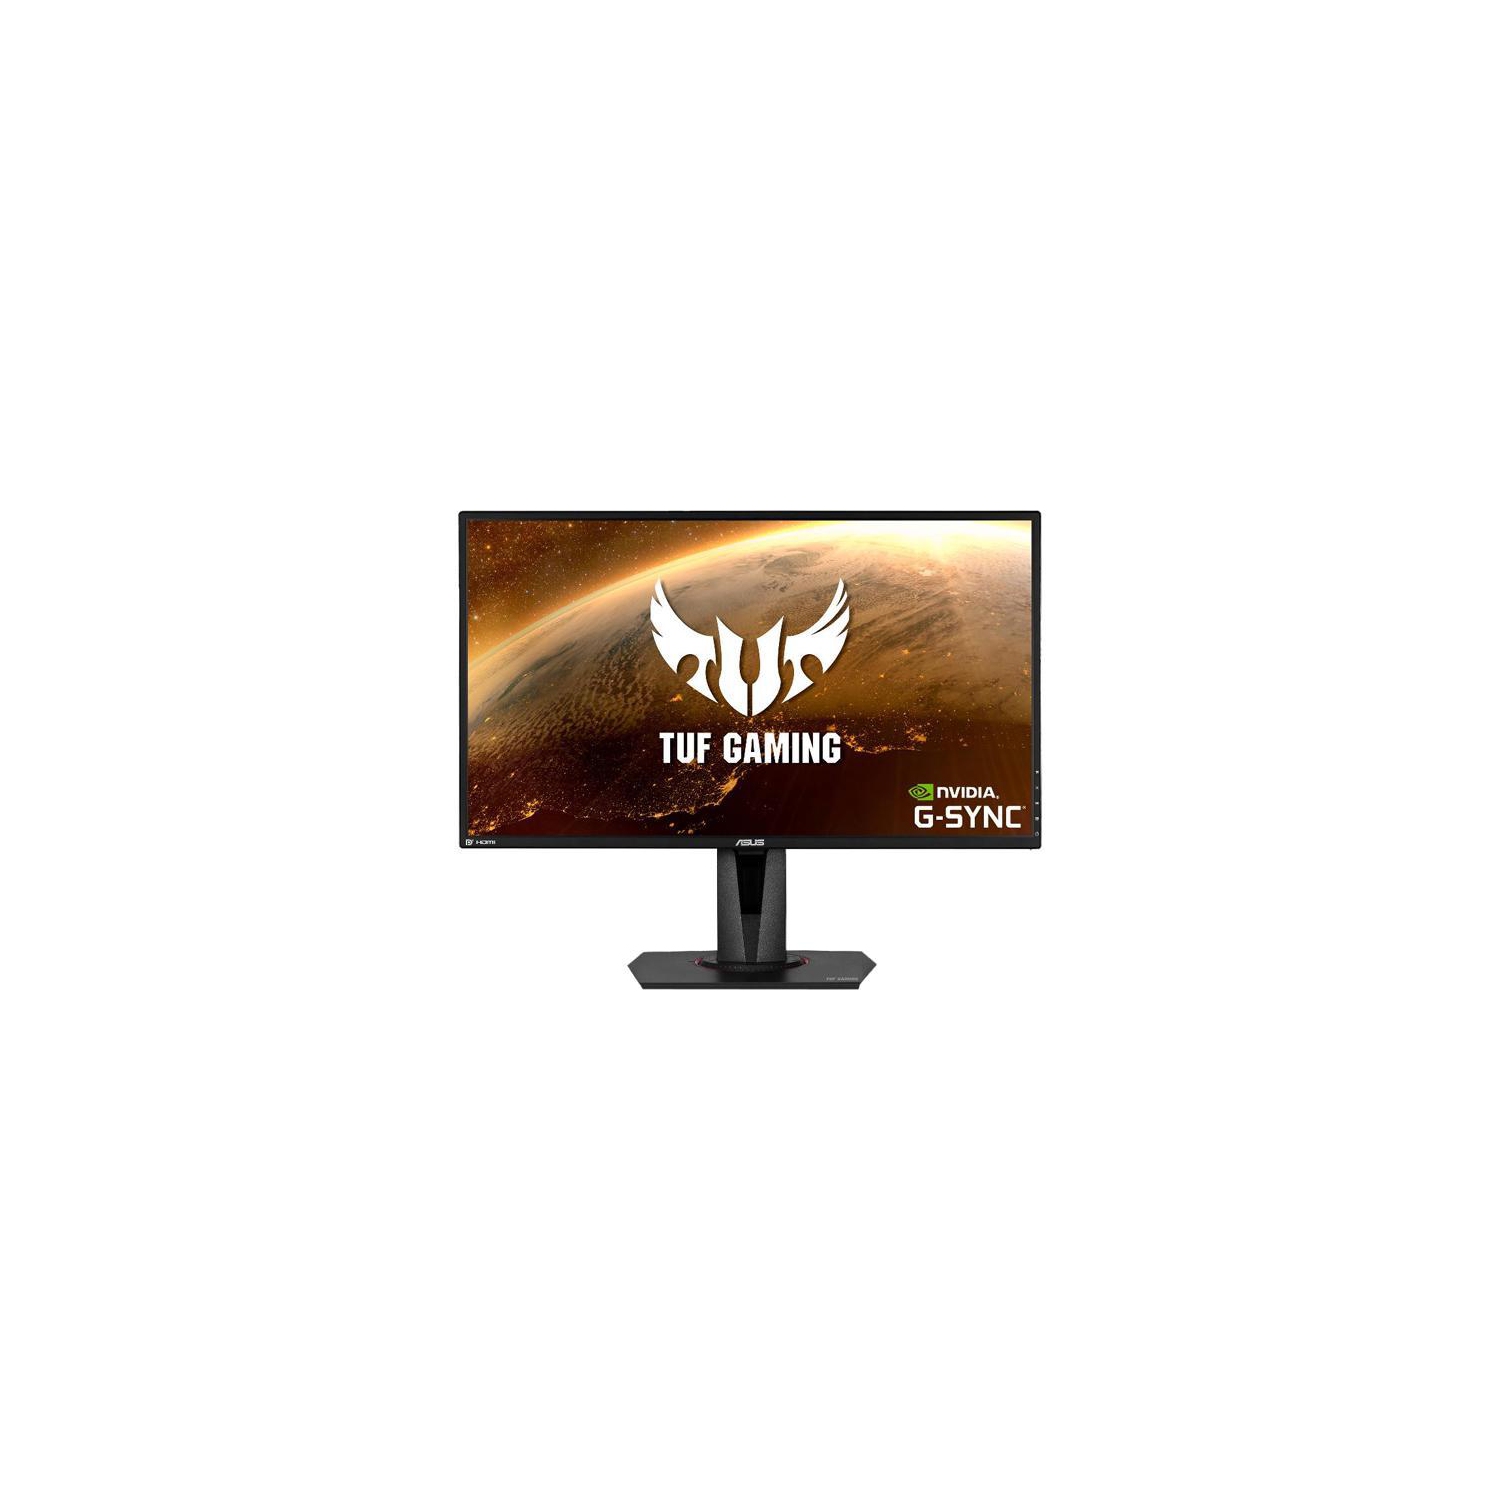 ASUS GAMING MONITOR TUF Gaming VG27AQ 27" 2560 x 1440 WQHD 2K Resolution 165Hz 1ms 2xHDMI DisplayPort Adaptive-Sync G-SYNC Compatible Asus Eye Care with Ultra Low-Blue Light & Flicker-Free IPS HDR10